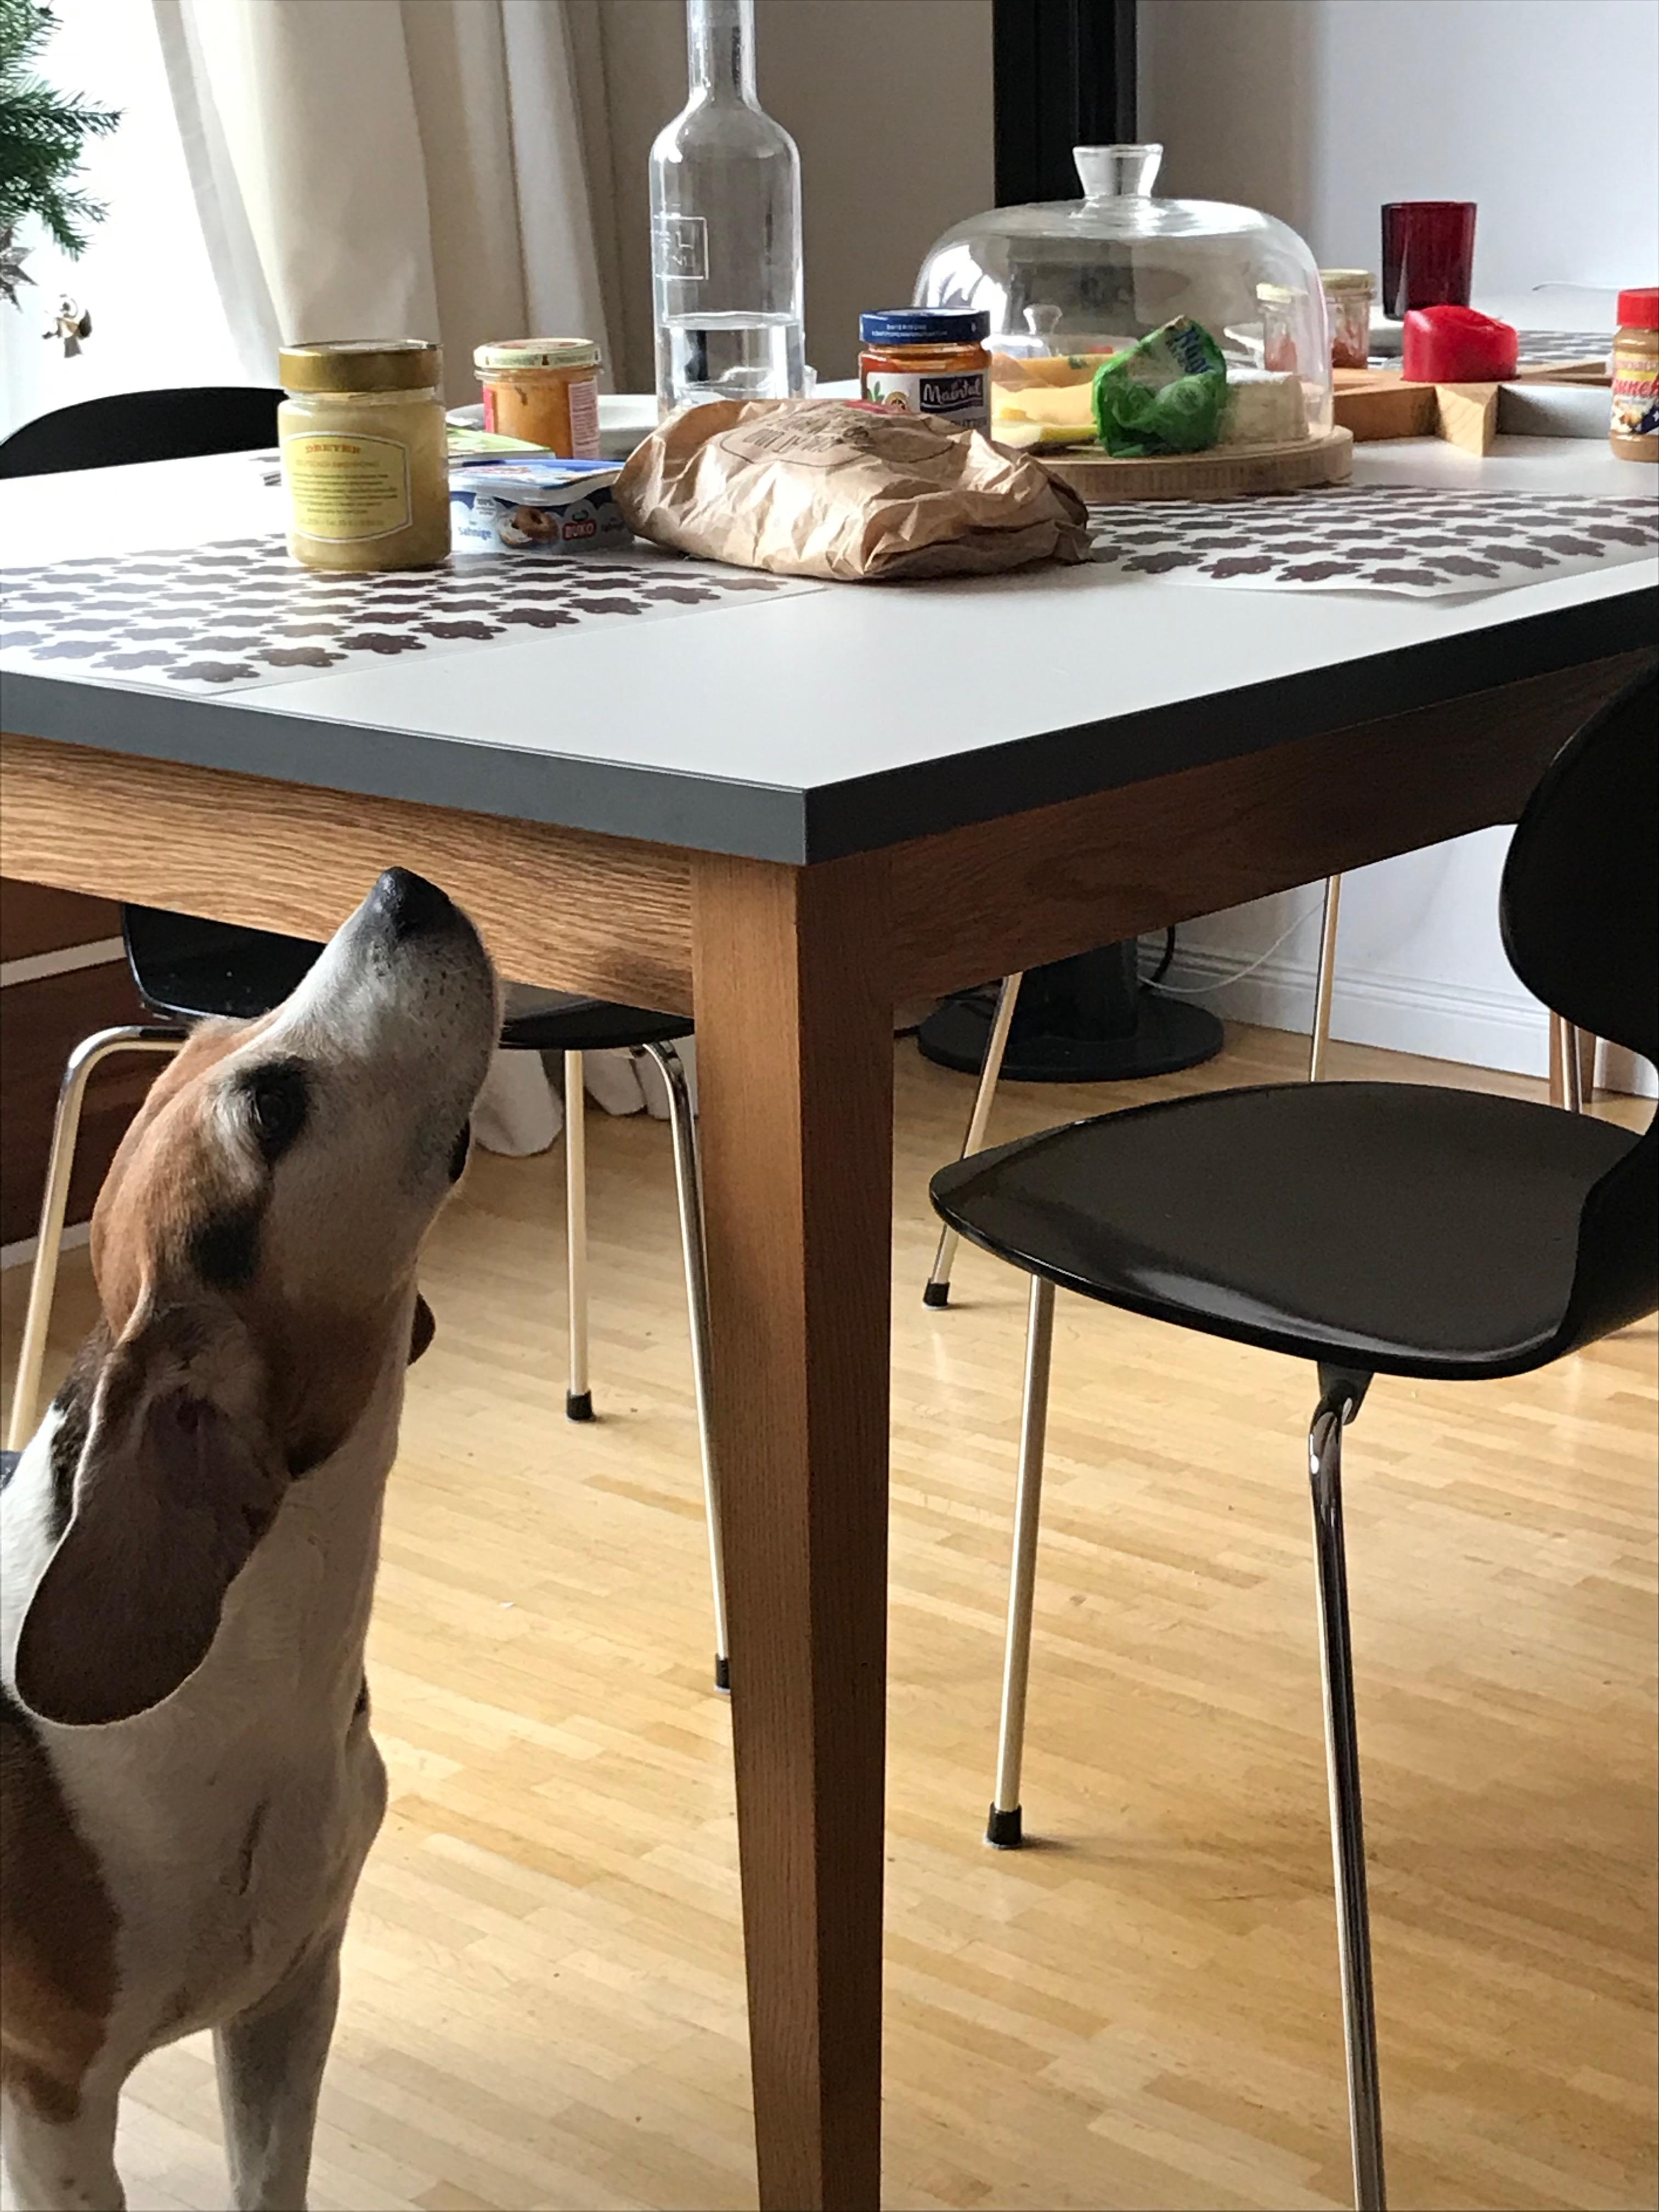 Beagle likes the new dining table #dining table #esstisch massiv #holztisch